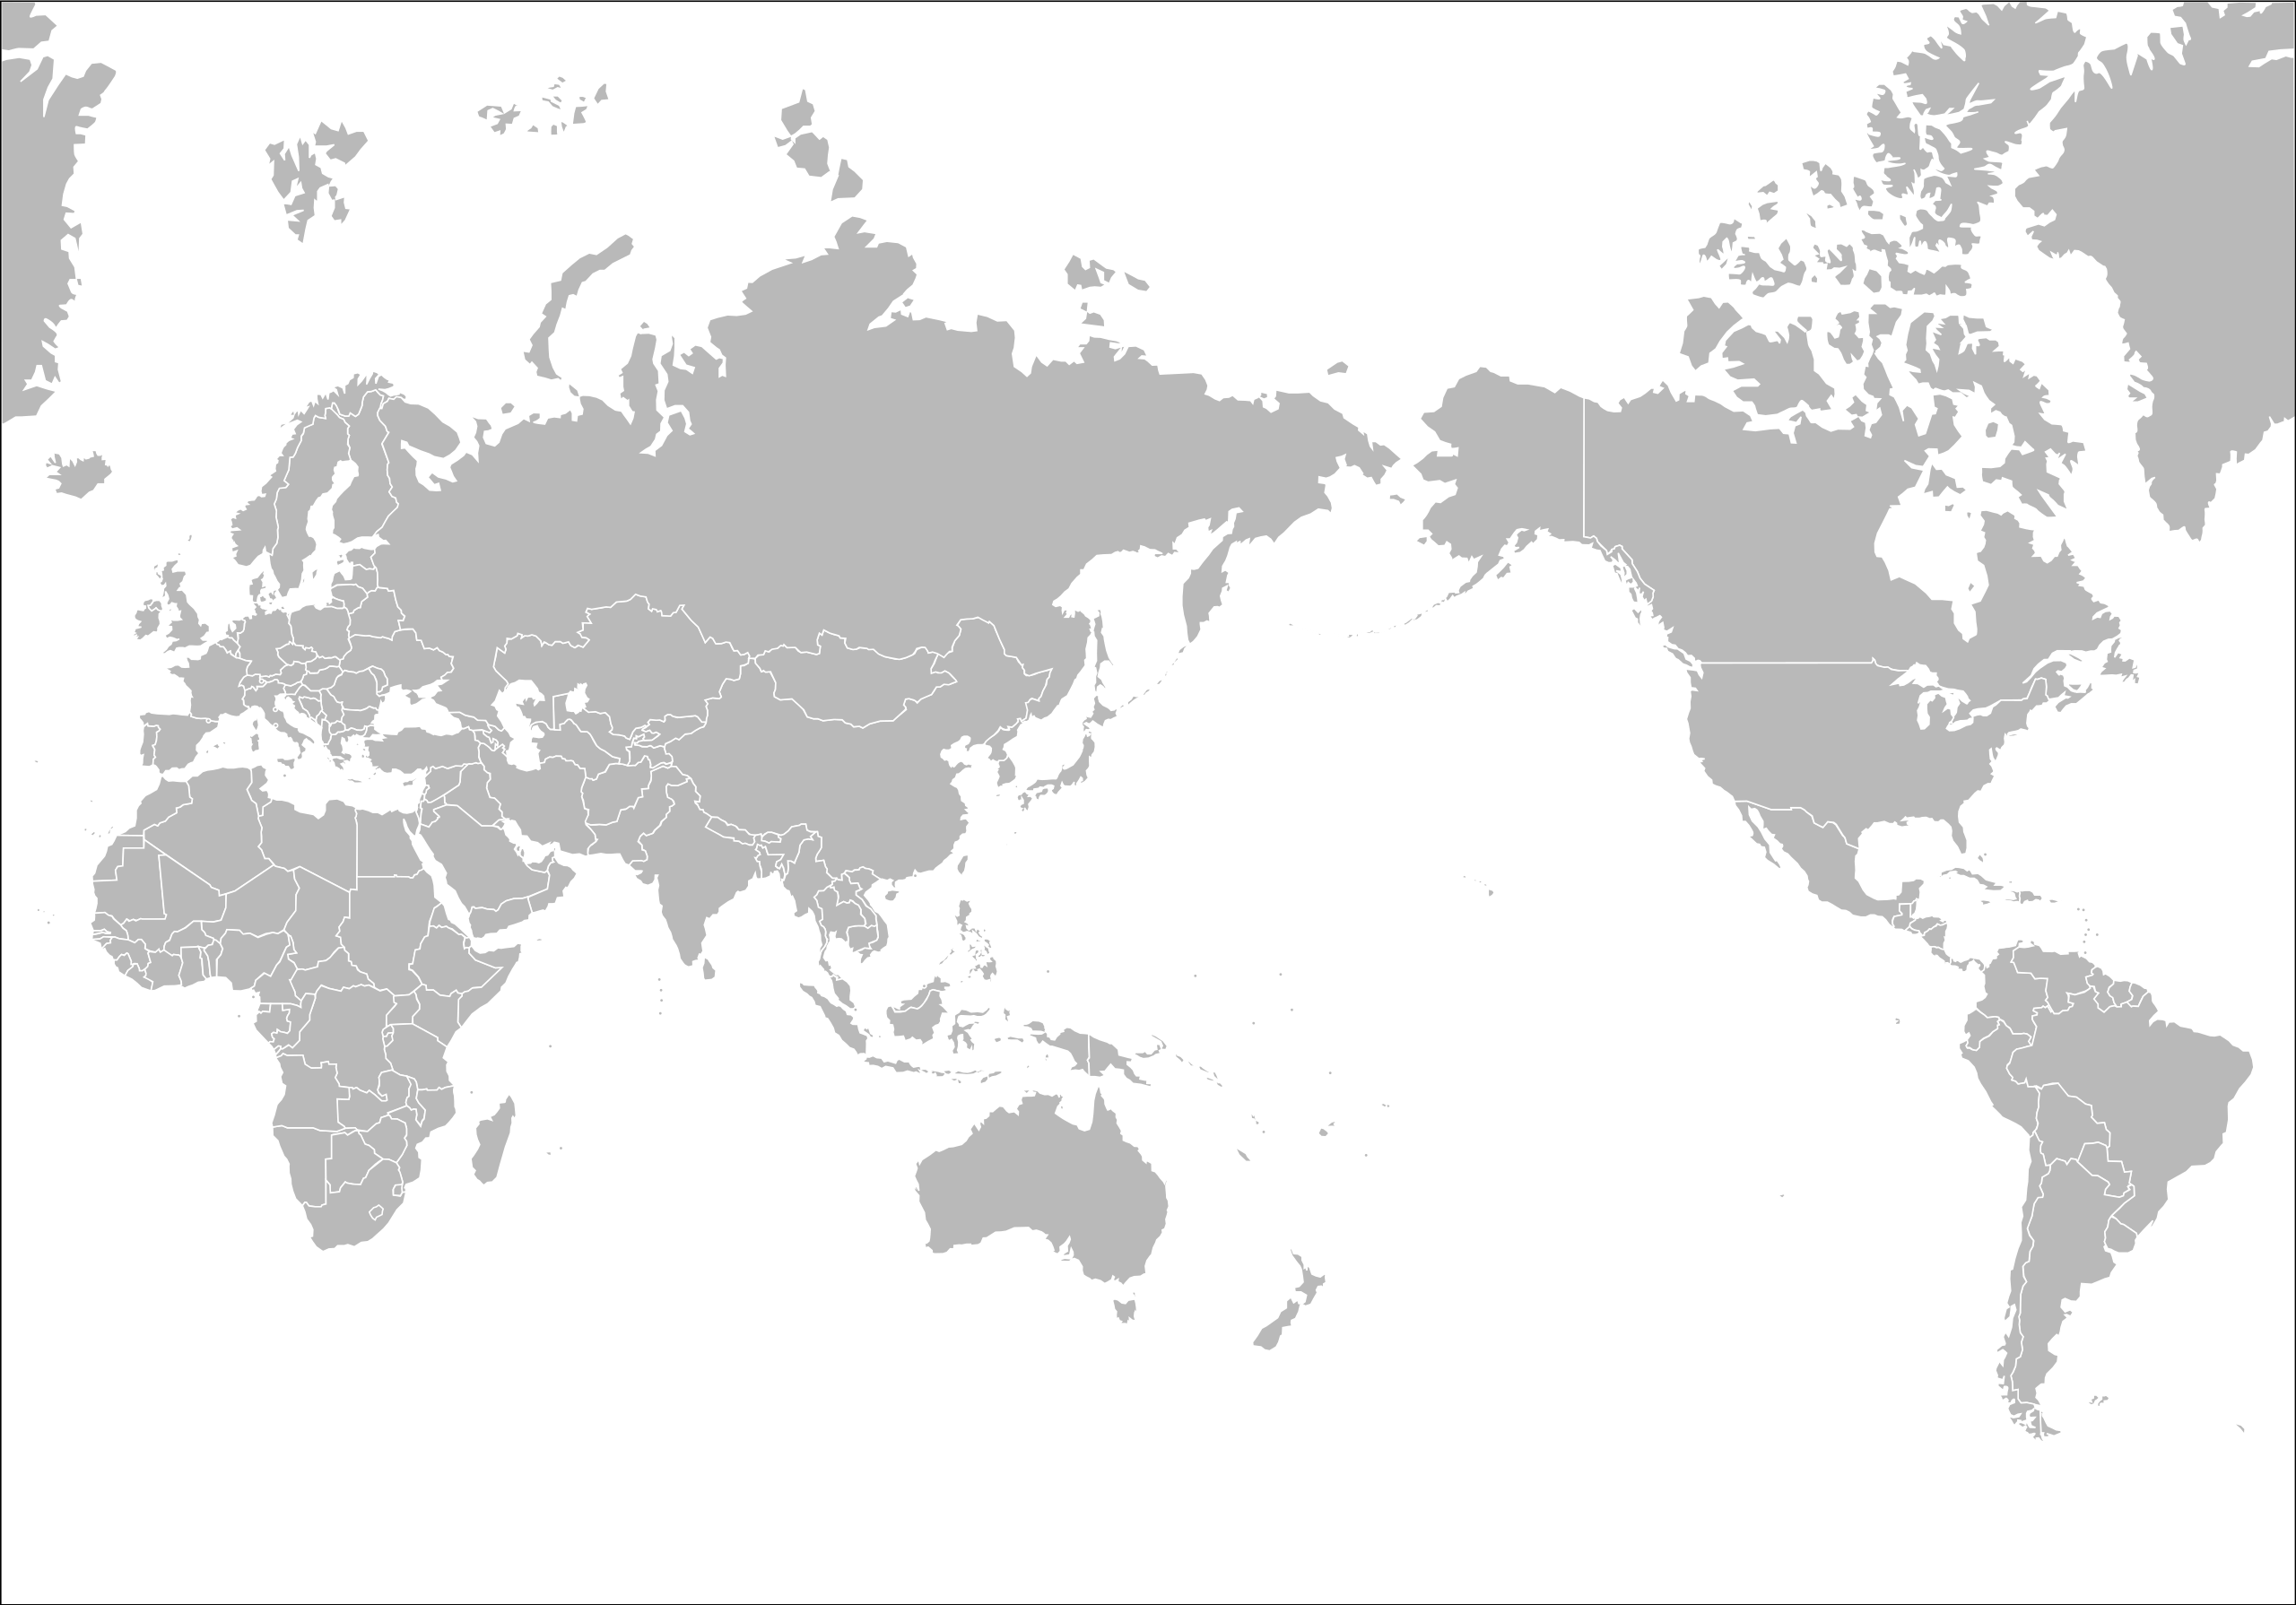 File:World Map Blank - with blue sea.svg - Wikipedia